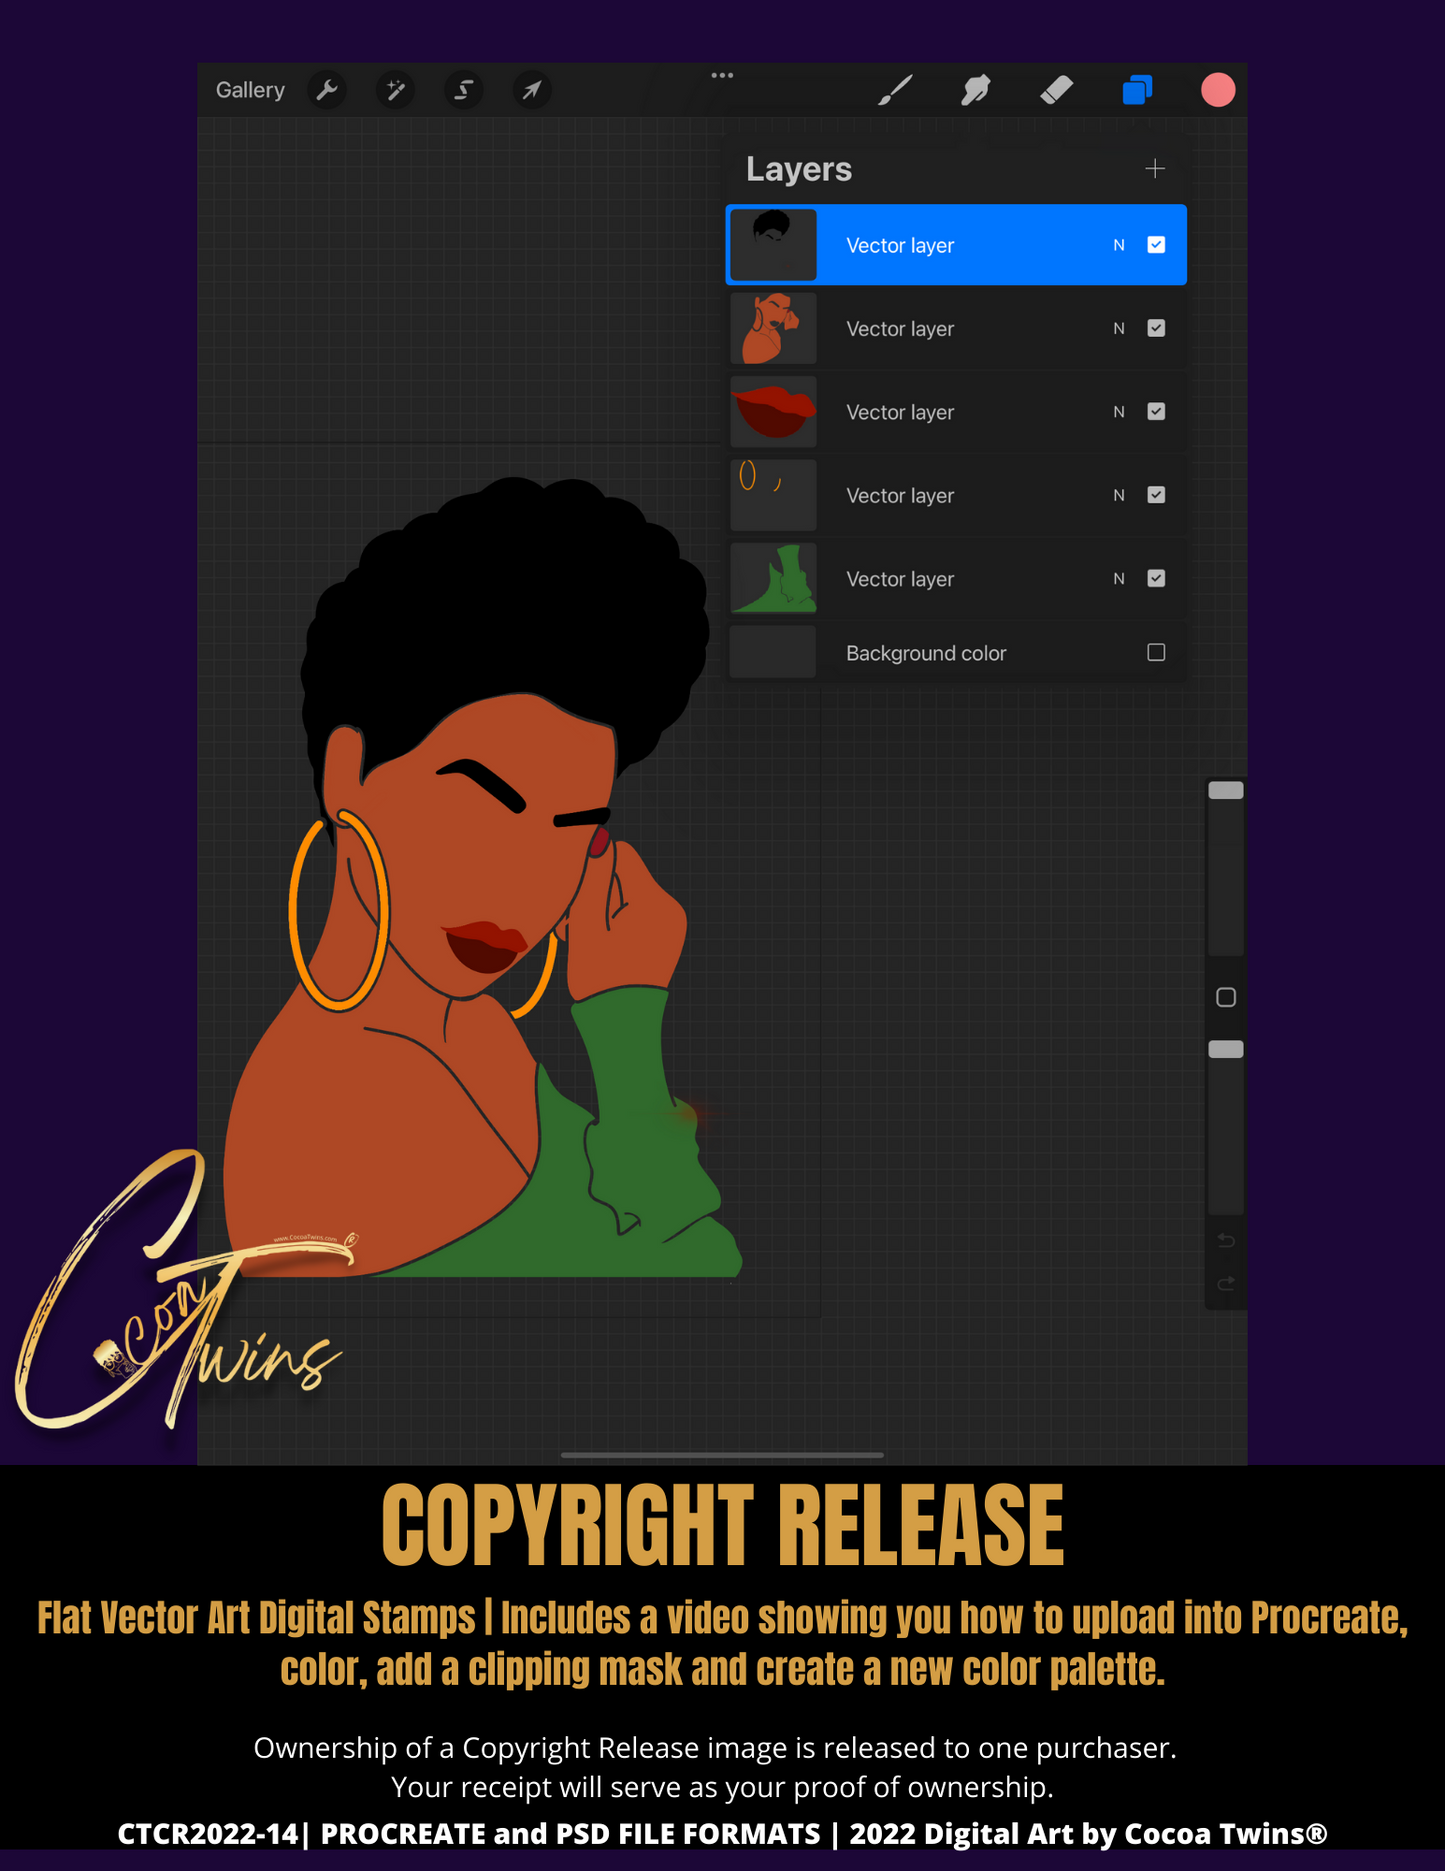 CTCR2022-14 | Copyright Release | A Digital Stamp for Use with Procreate, Adobe Fresco and/or Adobe Photoshop | 2022